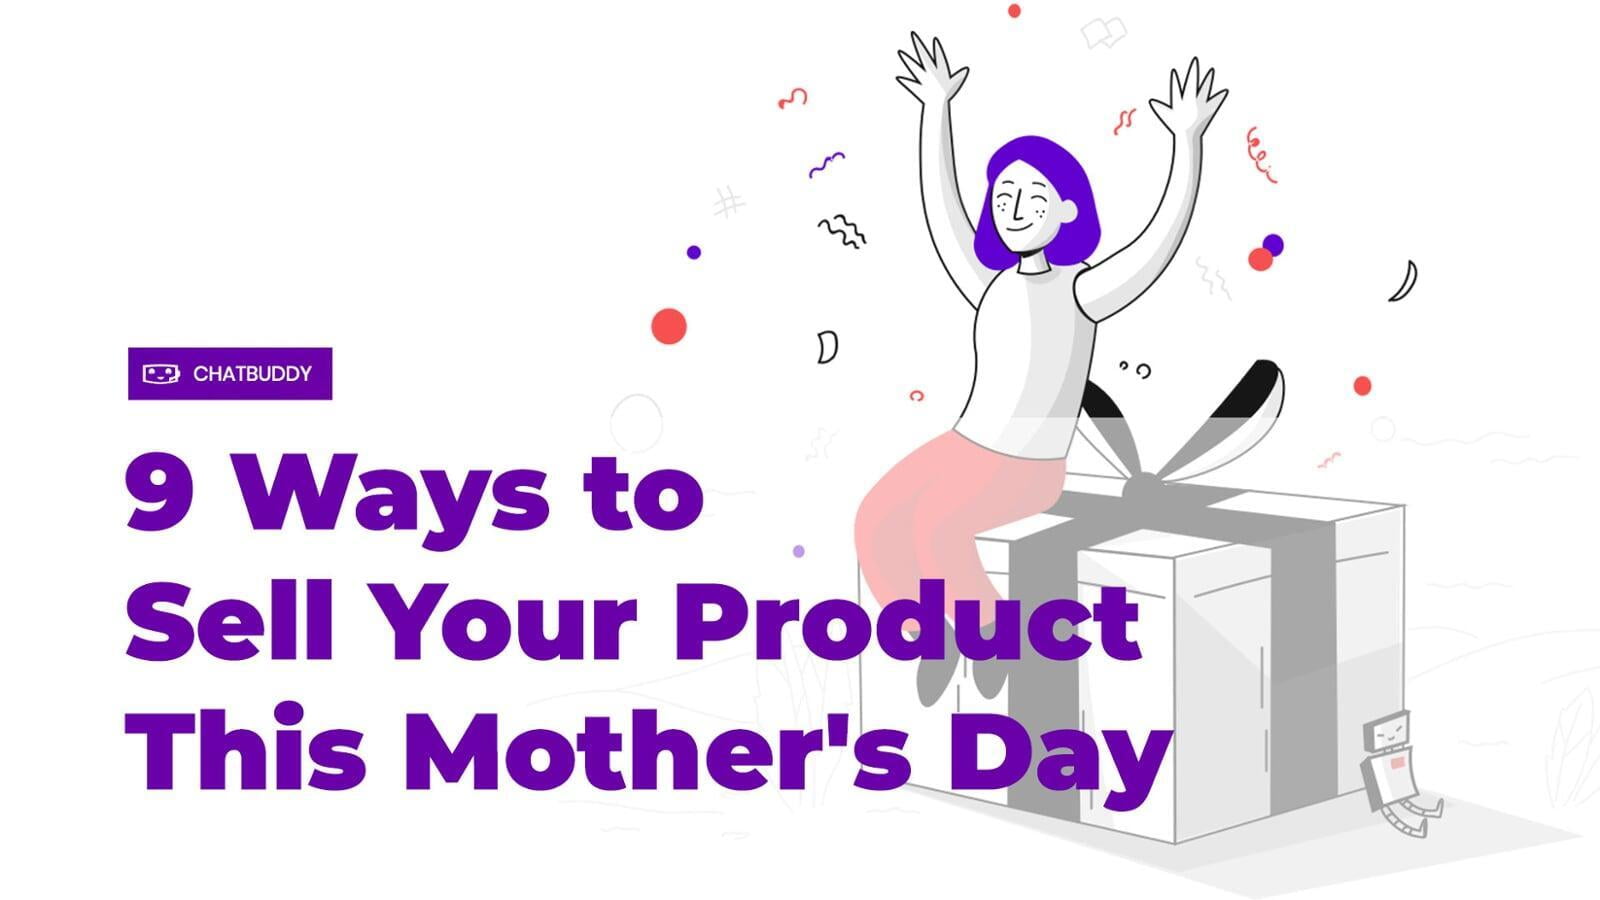 9 Ways to Sell Your Product This Mother's Day